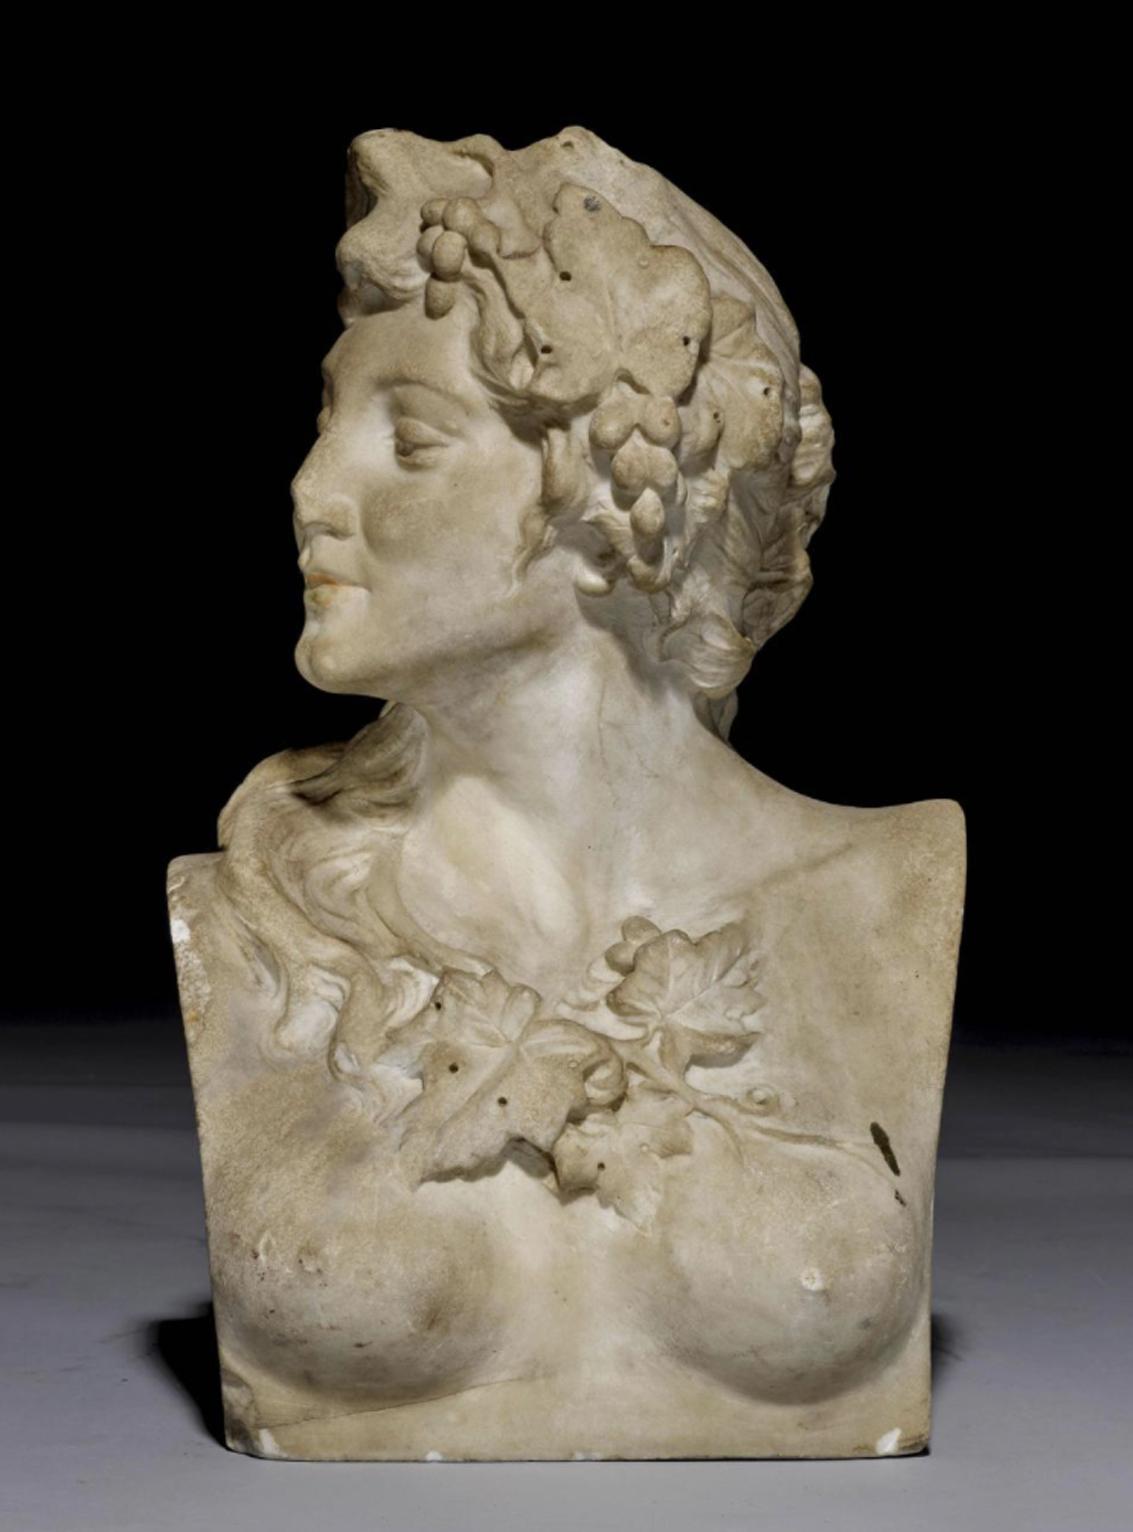 Unknown Figurative Sculpture - 18th White Marble Rococo Style Sculpture Bust of Goddess Flora